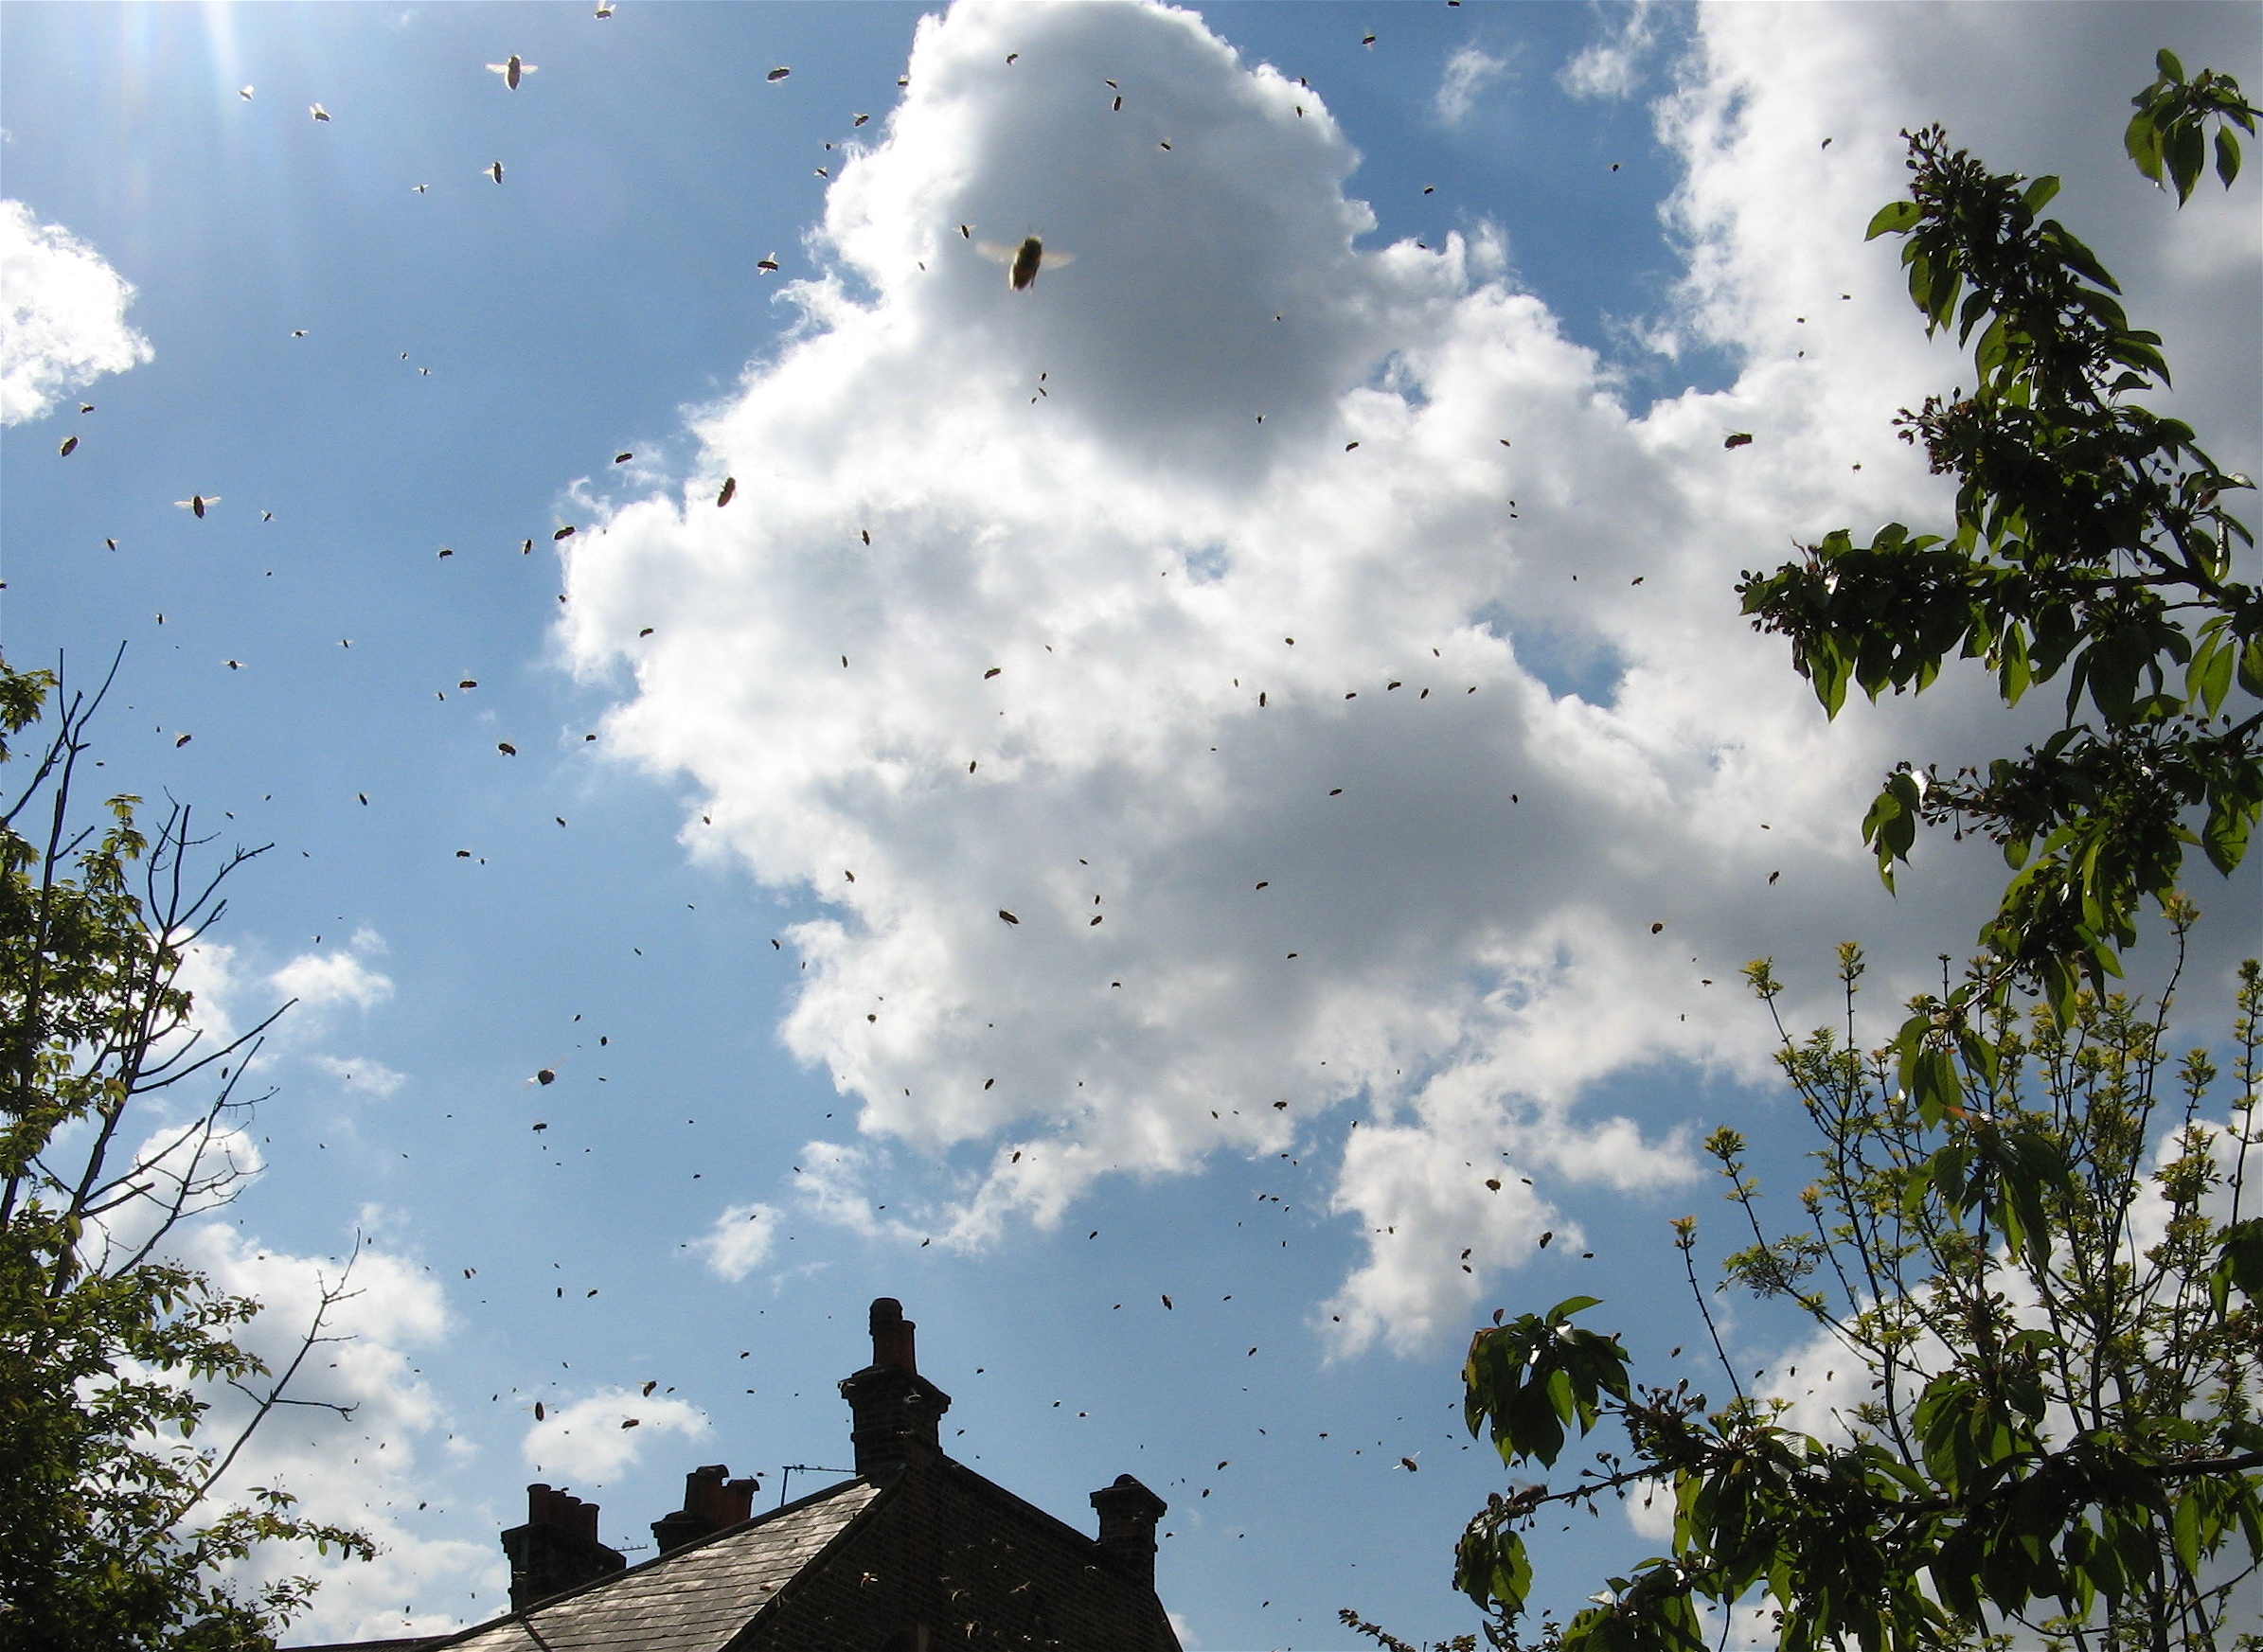 Bee swarm over the garden - the buzz was deafening